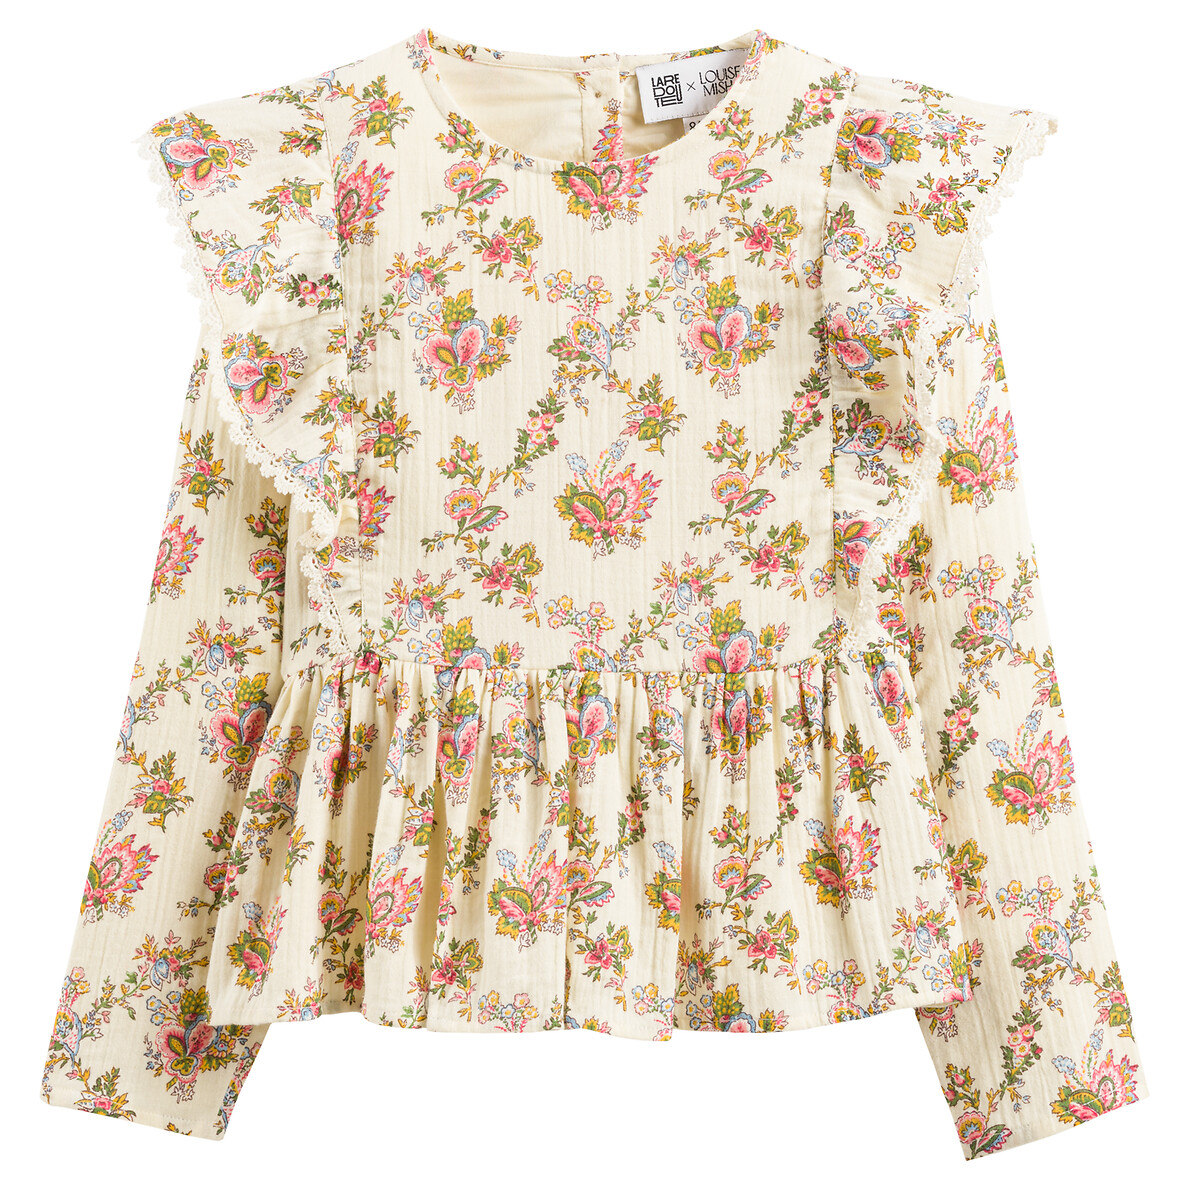 Double Cotton Muslin Blouse in Floral Print with Long Sleeves